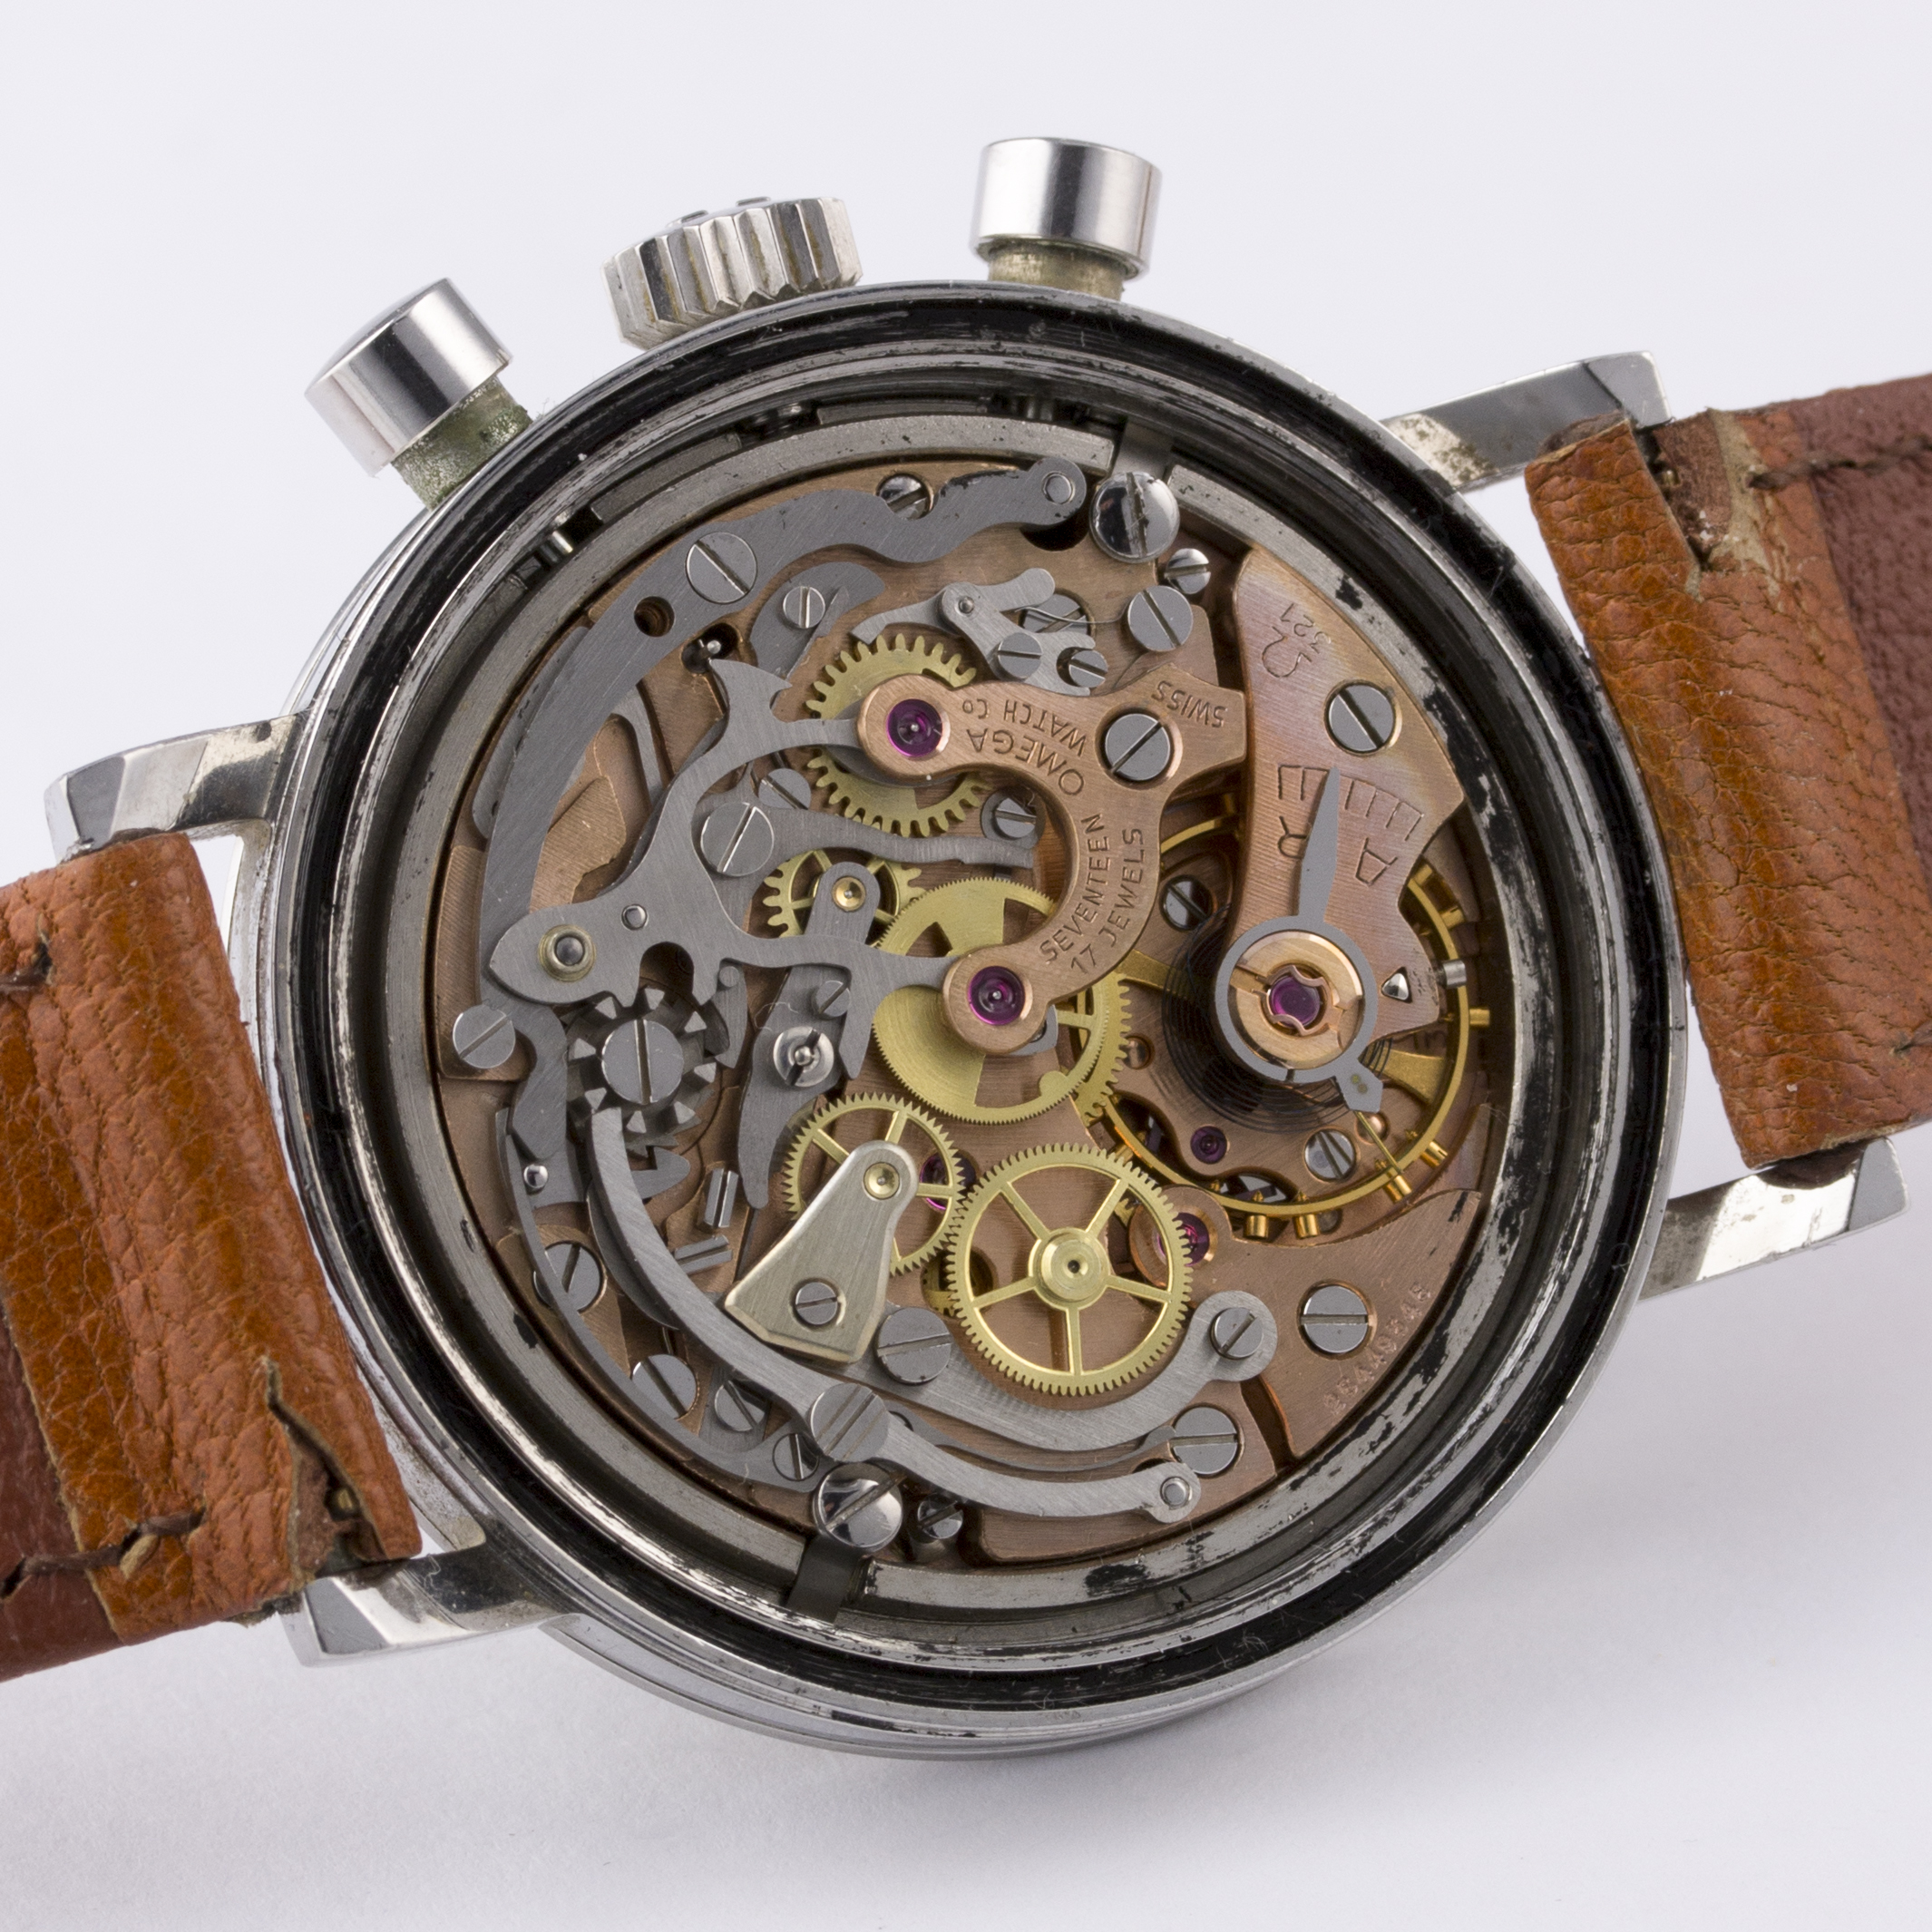 A GENTLEMAN`S STAINLESS OMEGA SEAMASTER CHRONOGRAPH WRIST WATCH CIRCA 1967, REF. 145.005-67 D: - Image 7 of 8